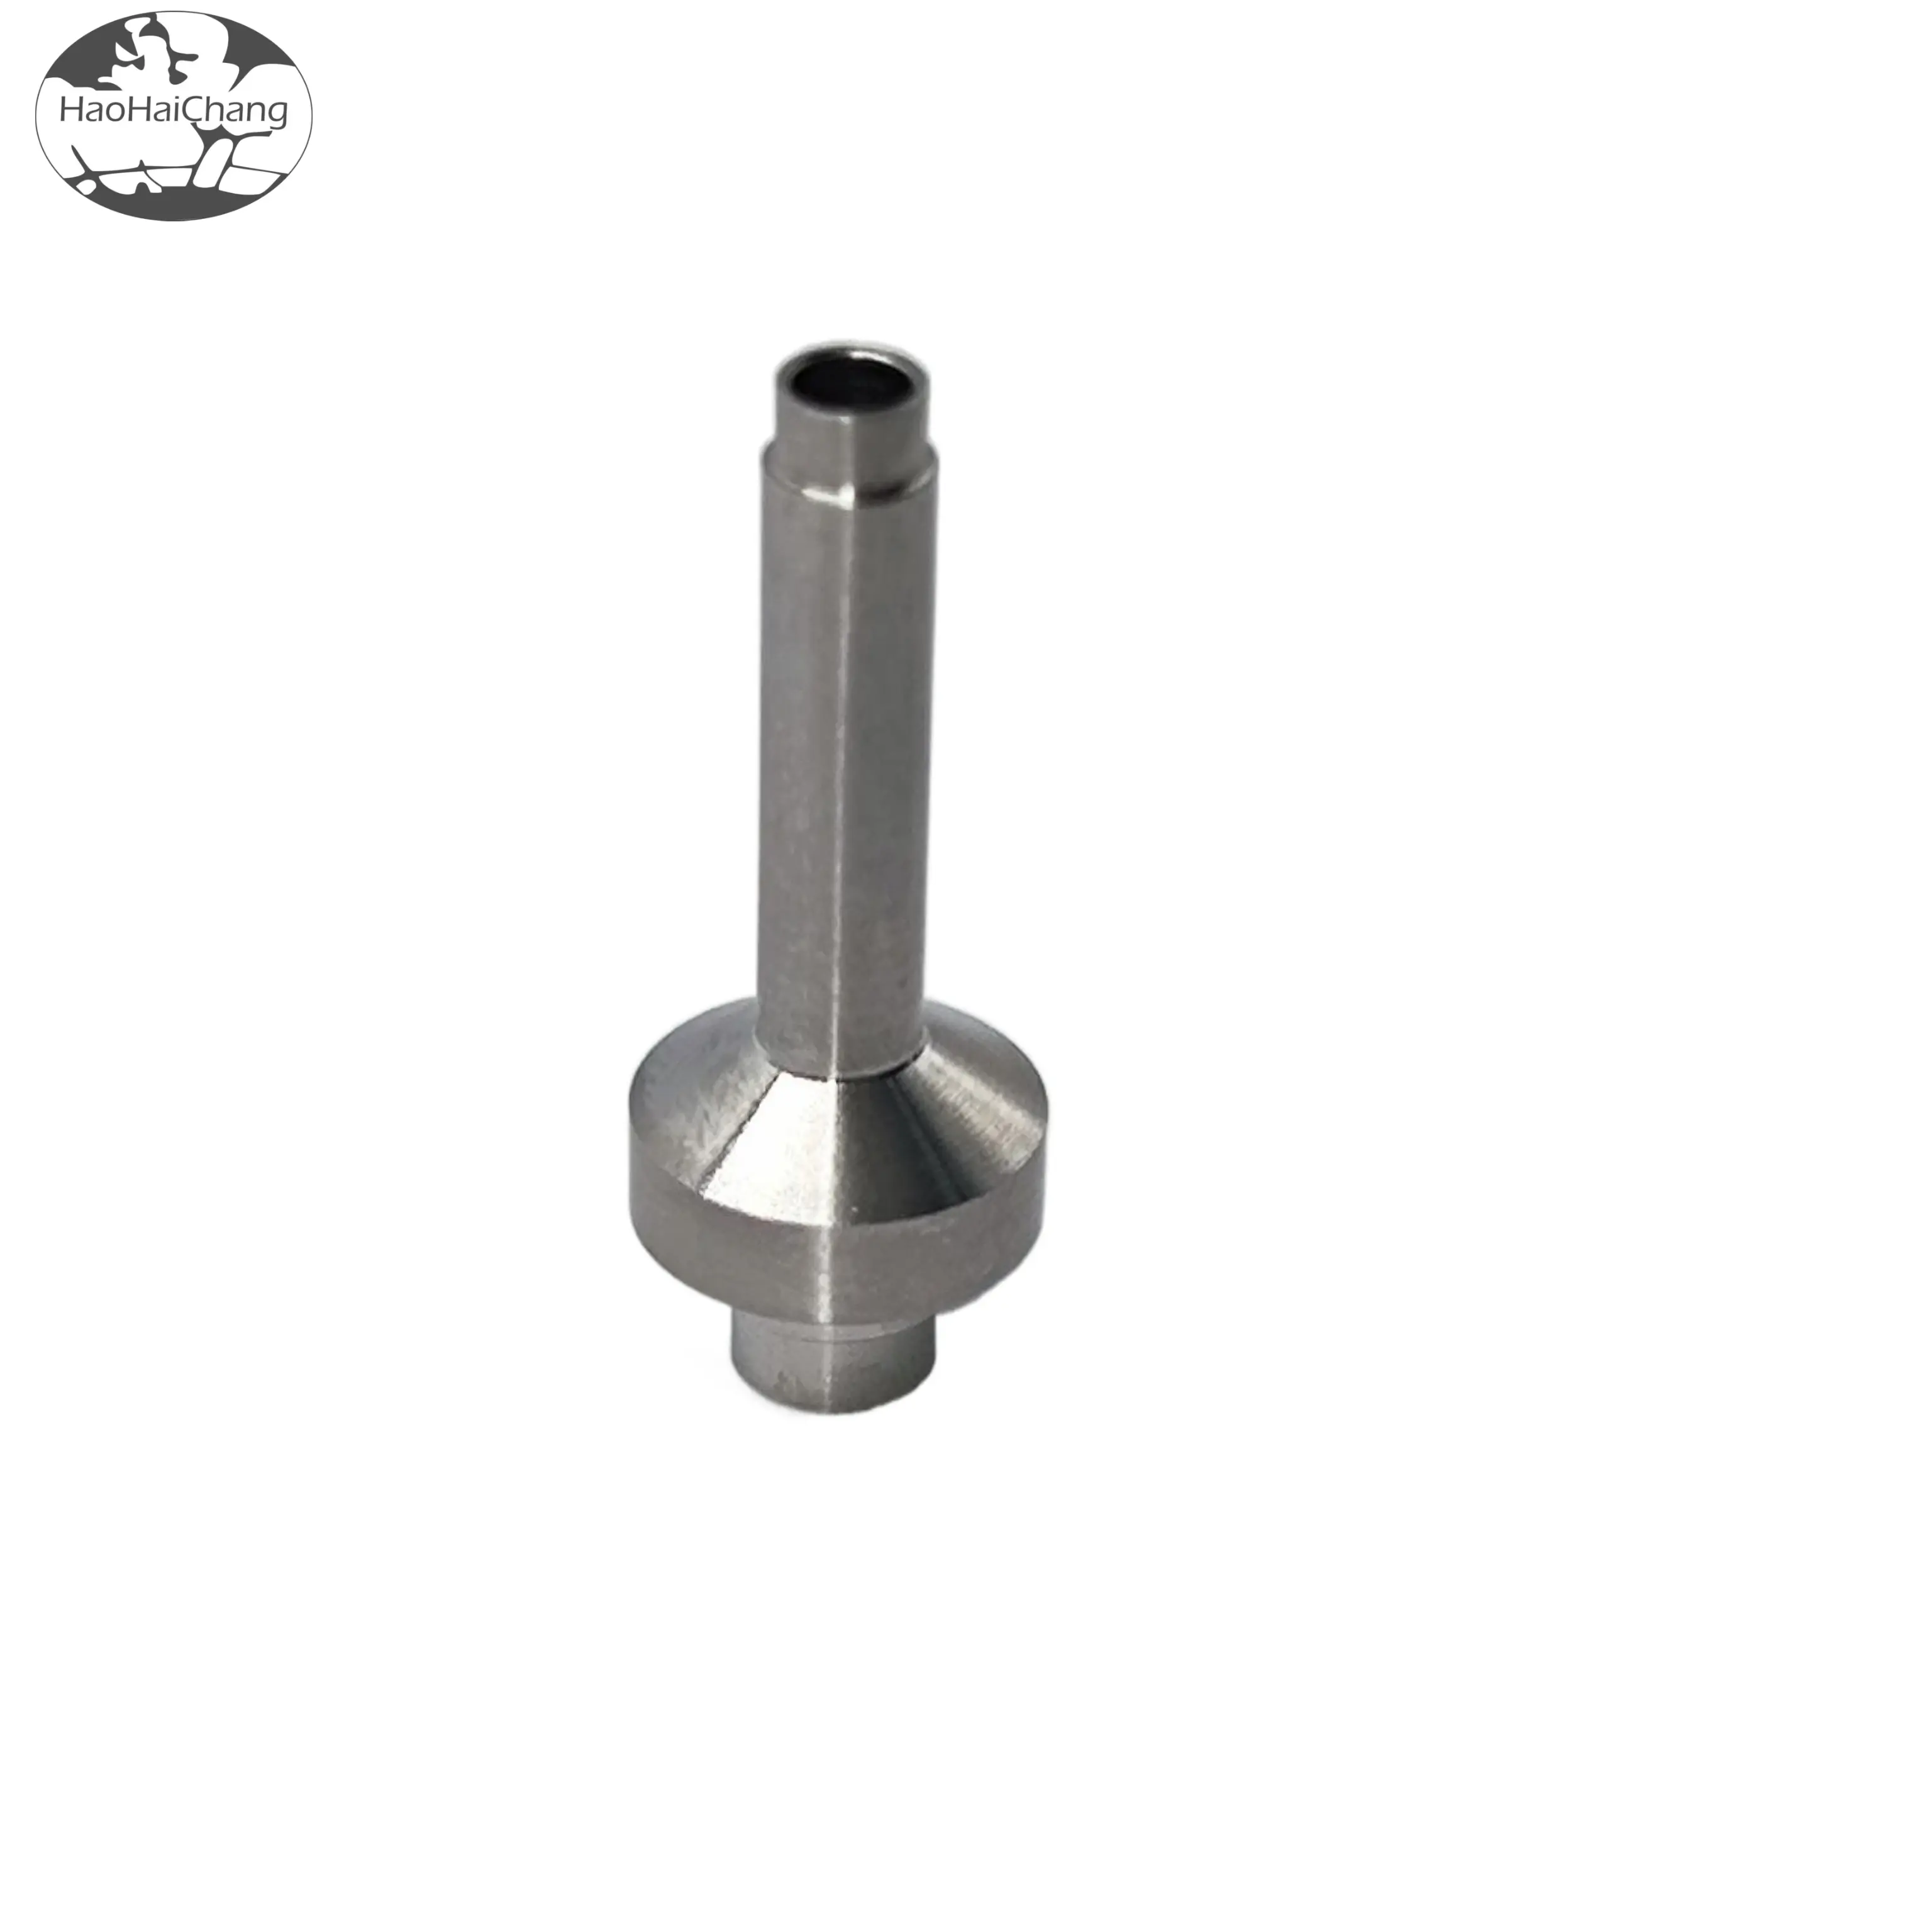 HHC-554 Stainless Steel Tightening Bearing Pins Small Shaft Parts